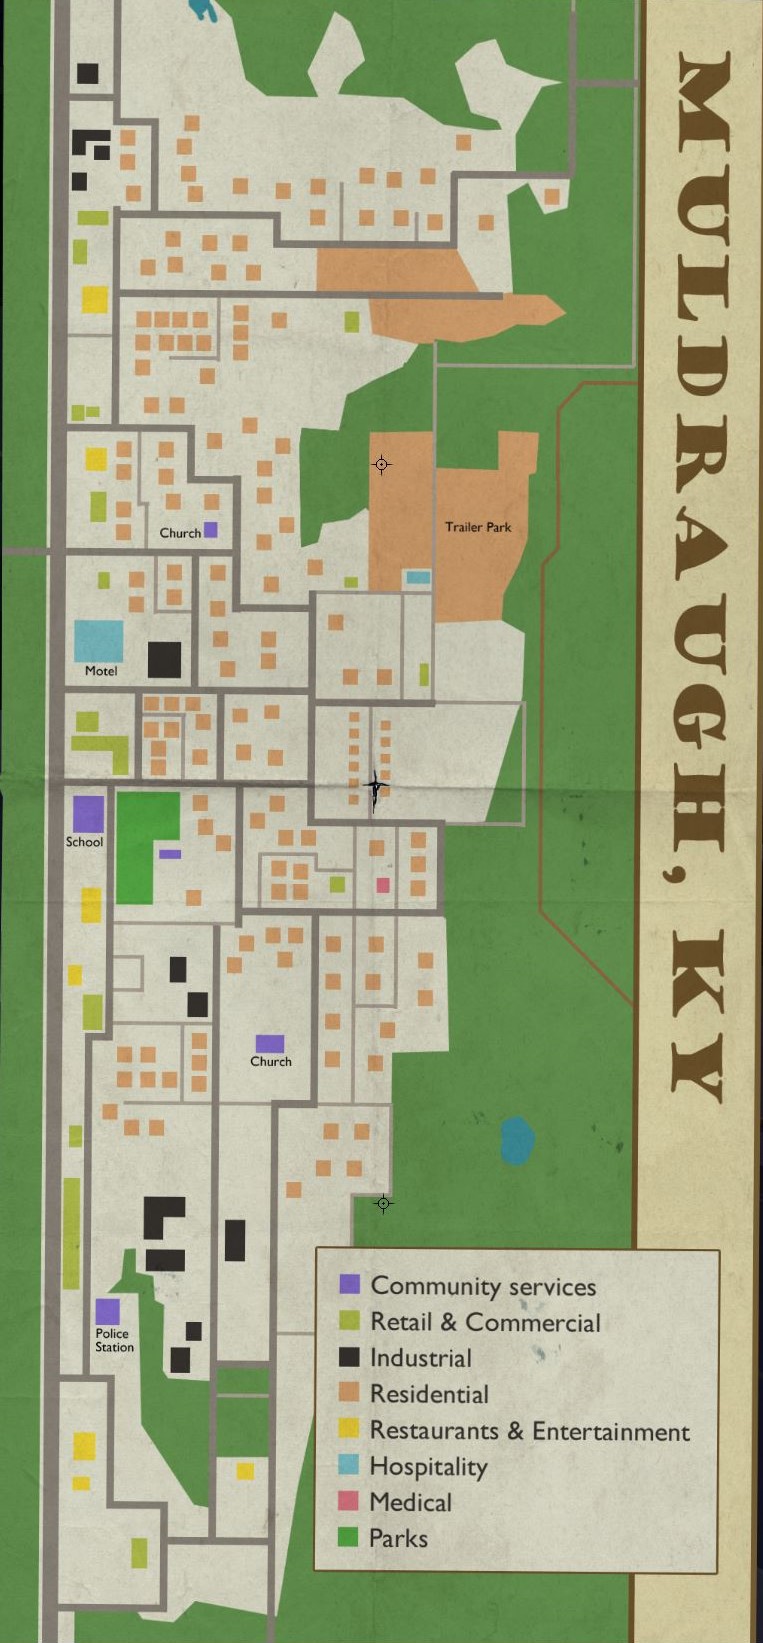 project zomboid mapsed